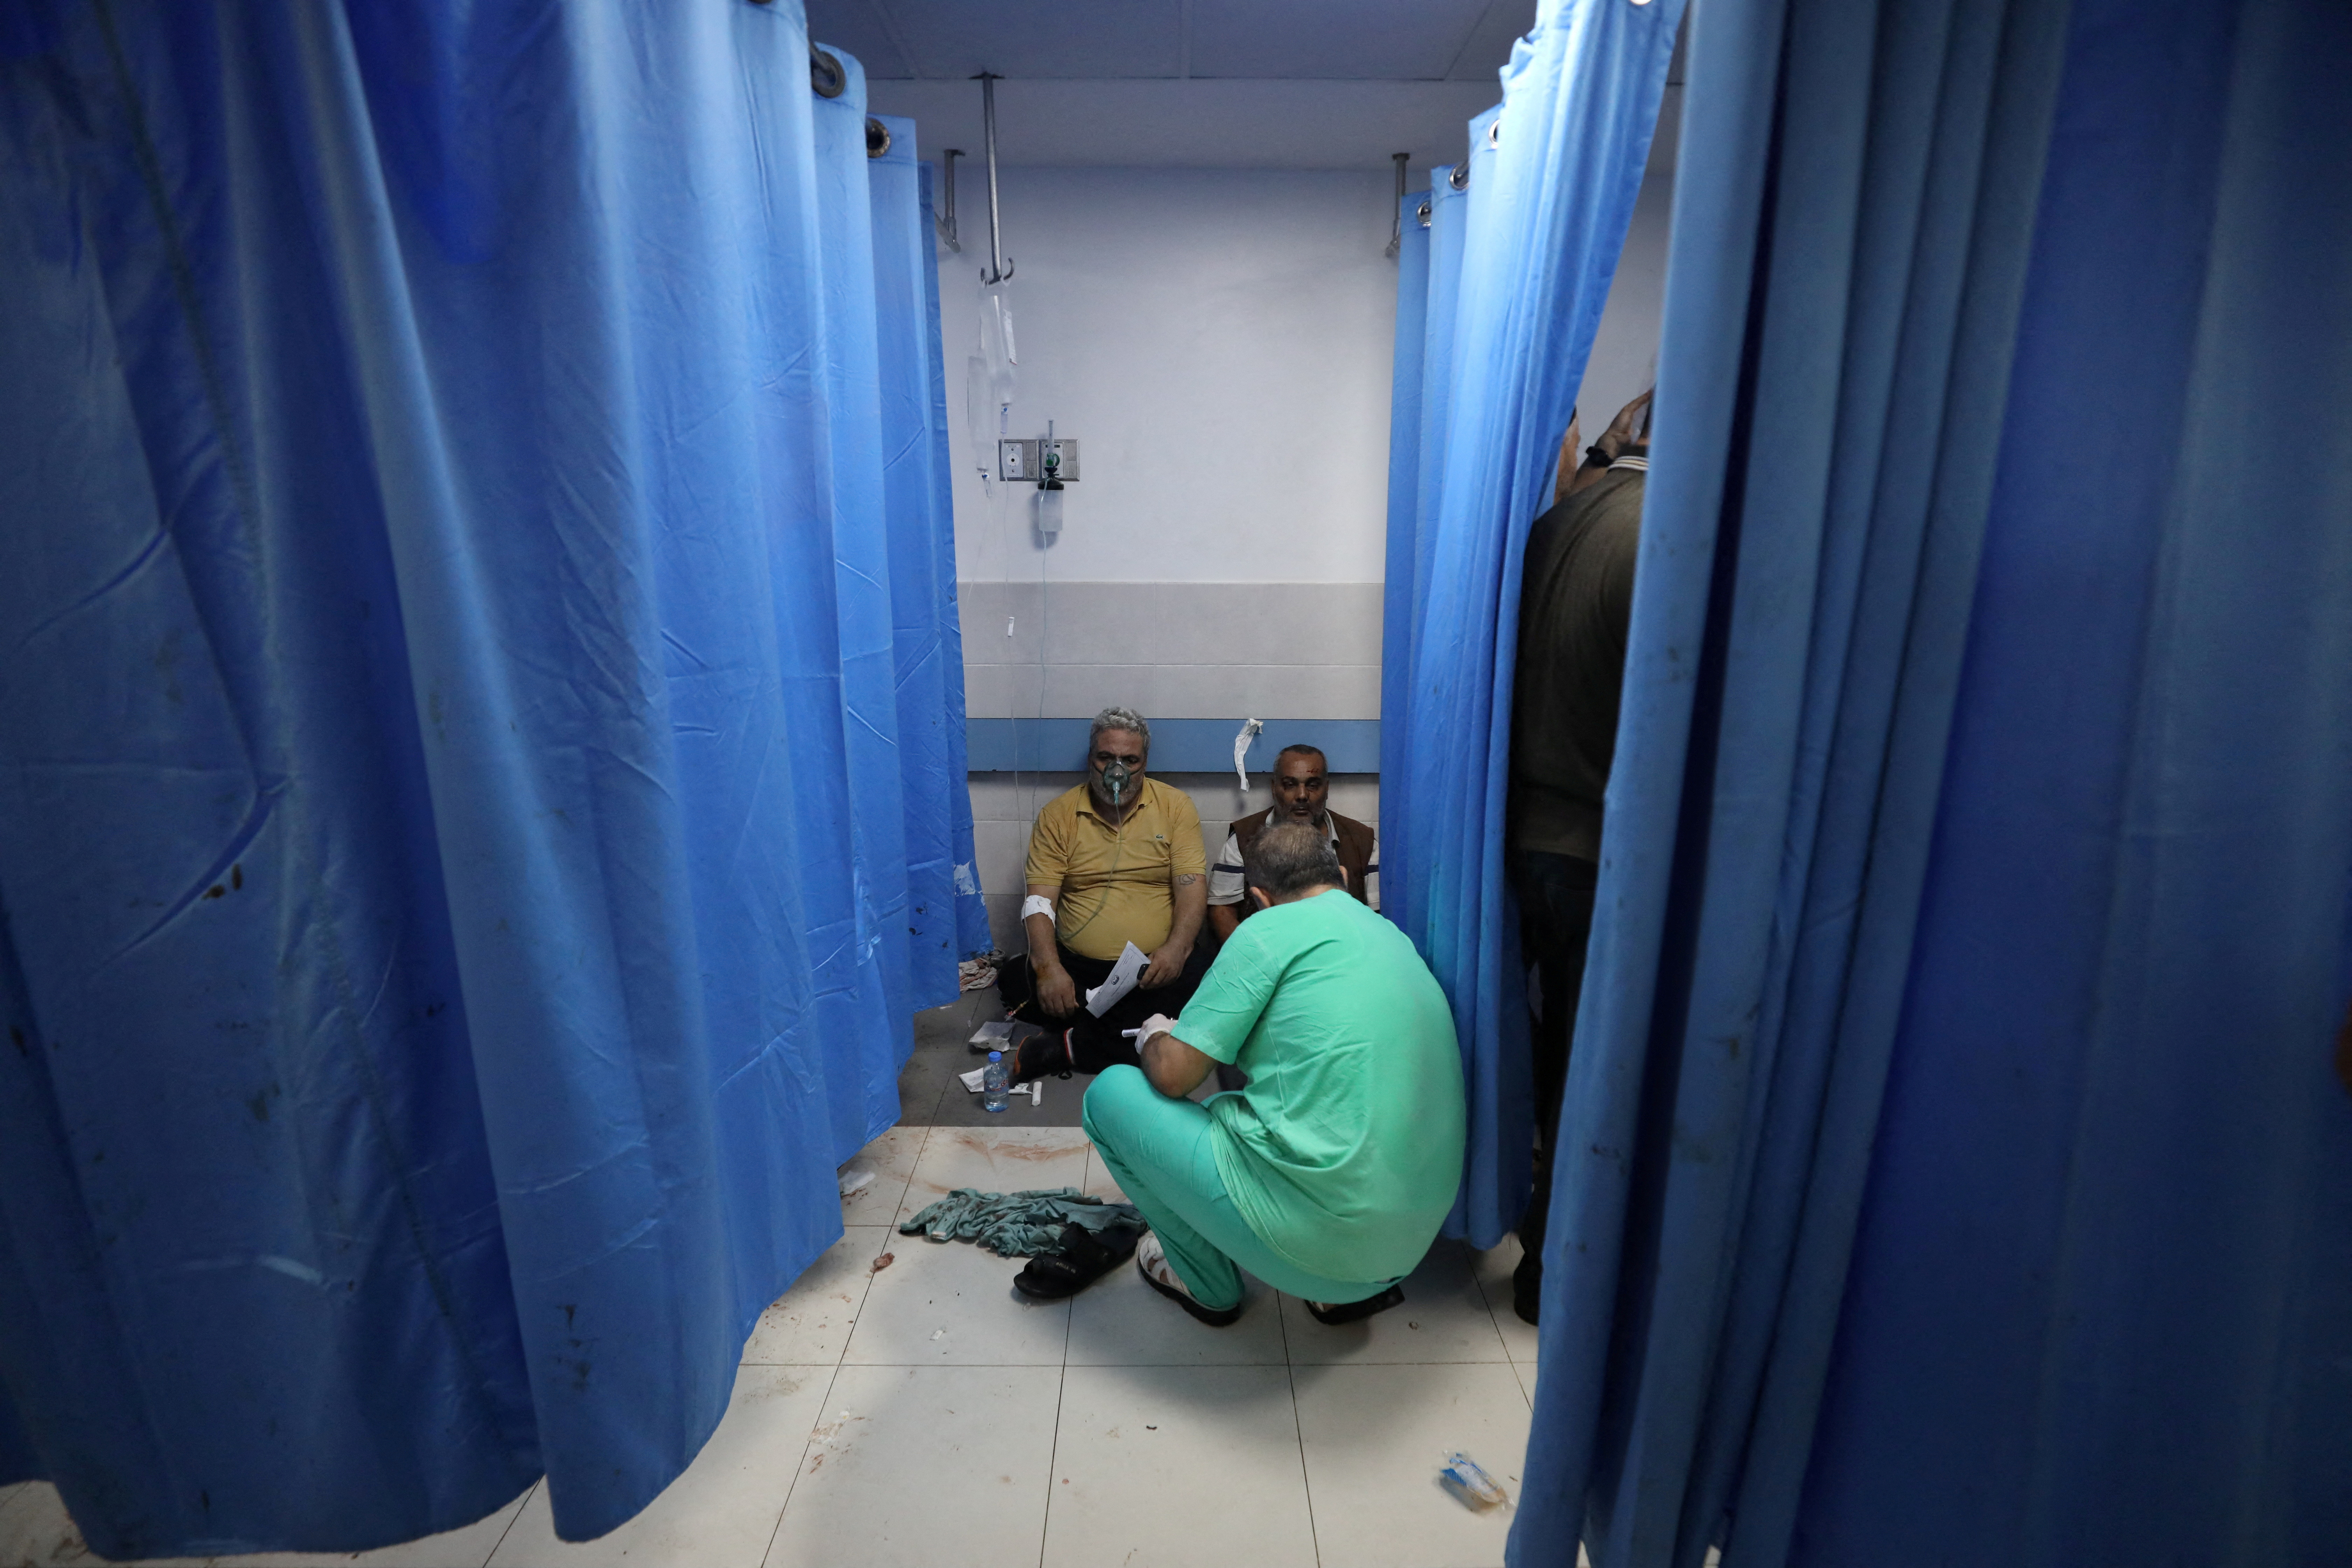 People are assisted at Shifa Hospital after hundreds of Palestinians were killed in a blast at Al-Ahli hospital in Gaza that Israeli and Palestinian officials blamed on each other